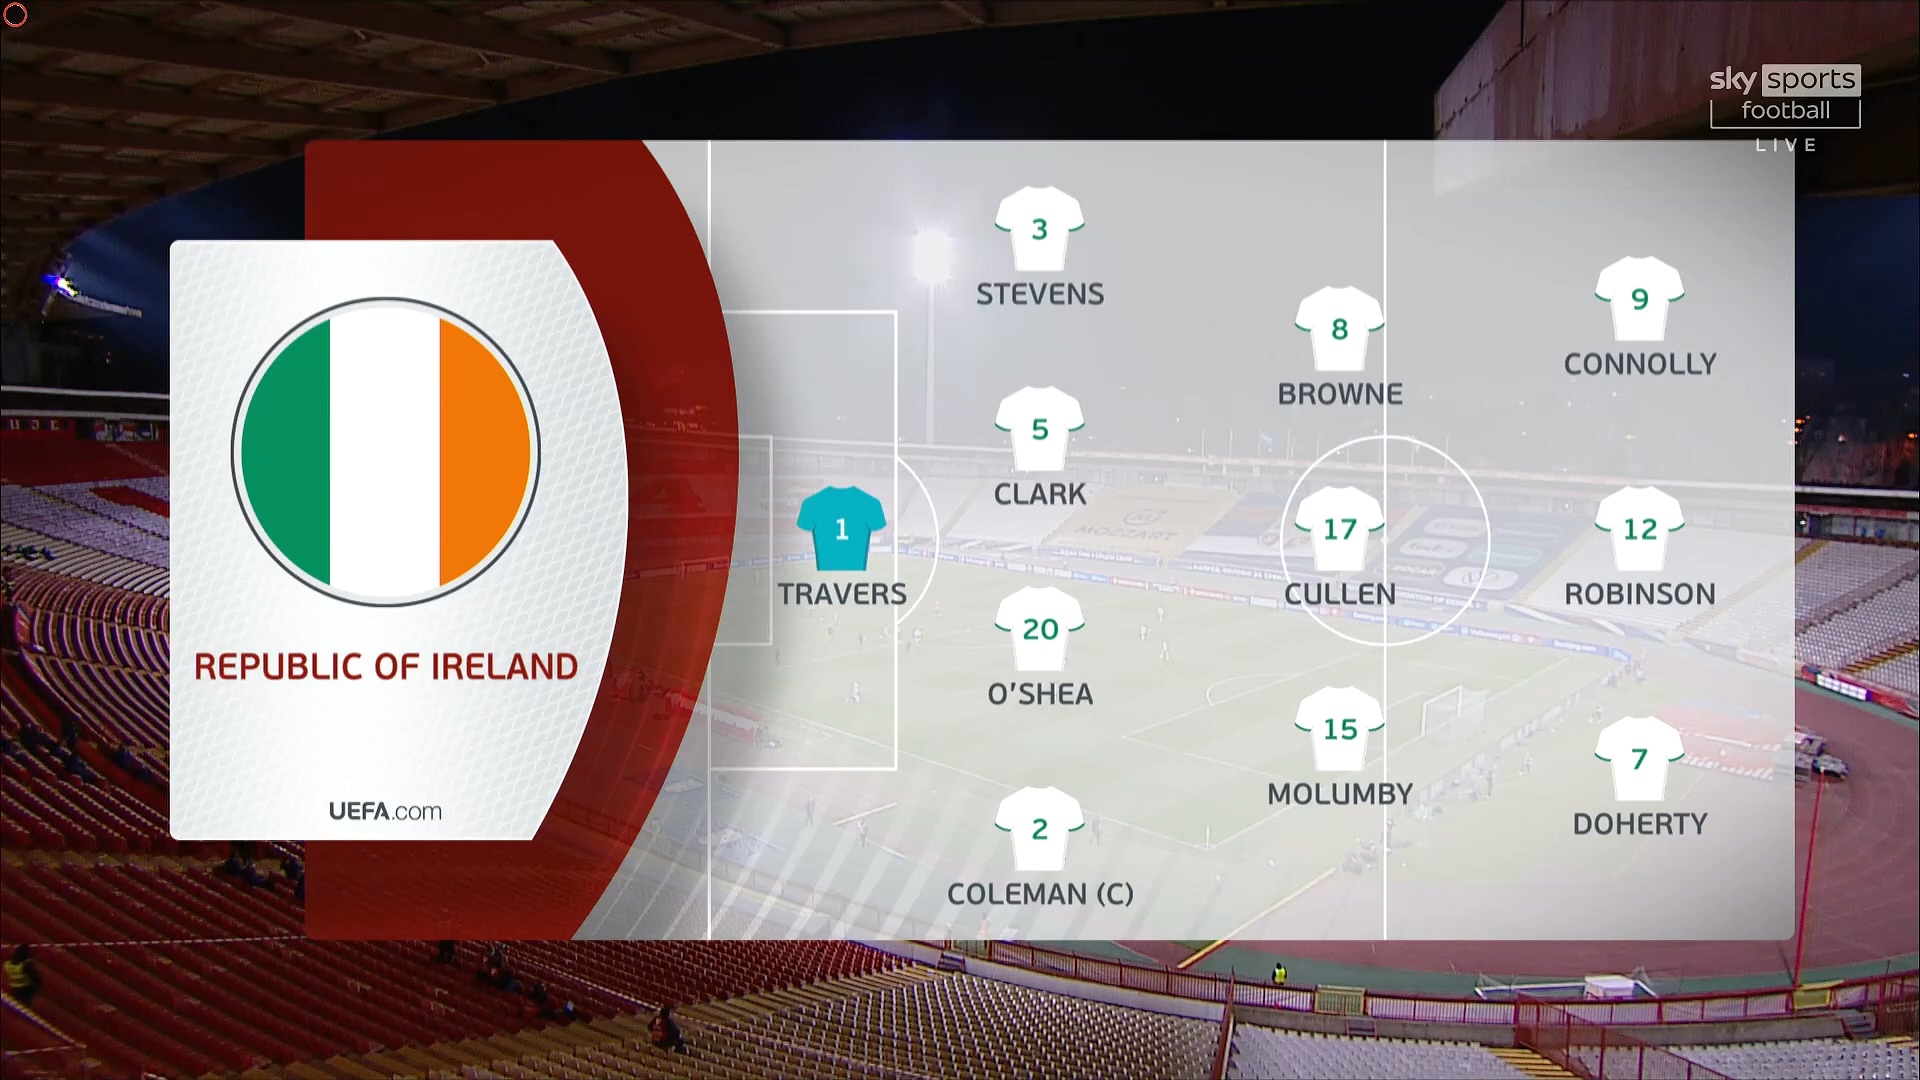 World Cup 2022 Qualifiers - Serbia vs Ireland - 24/03/2021